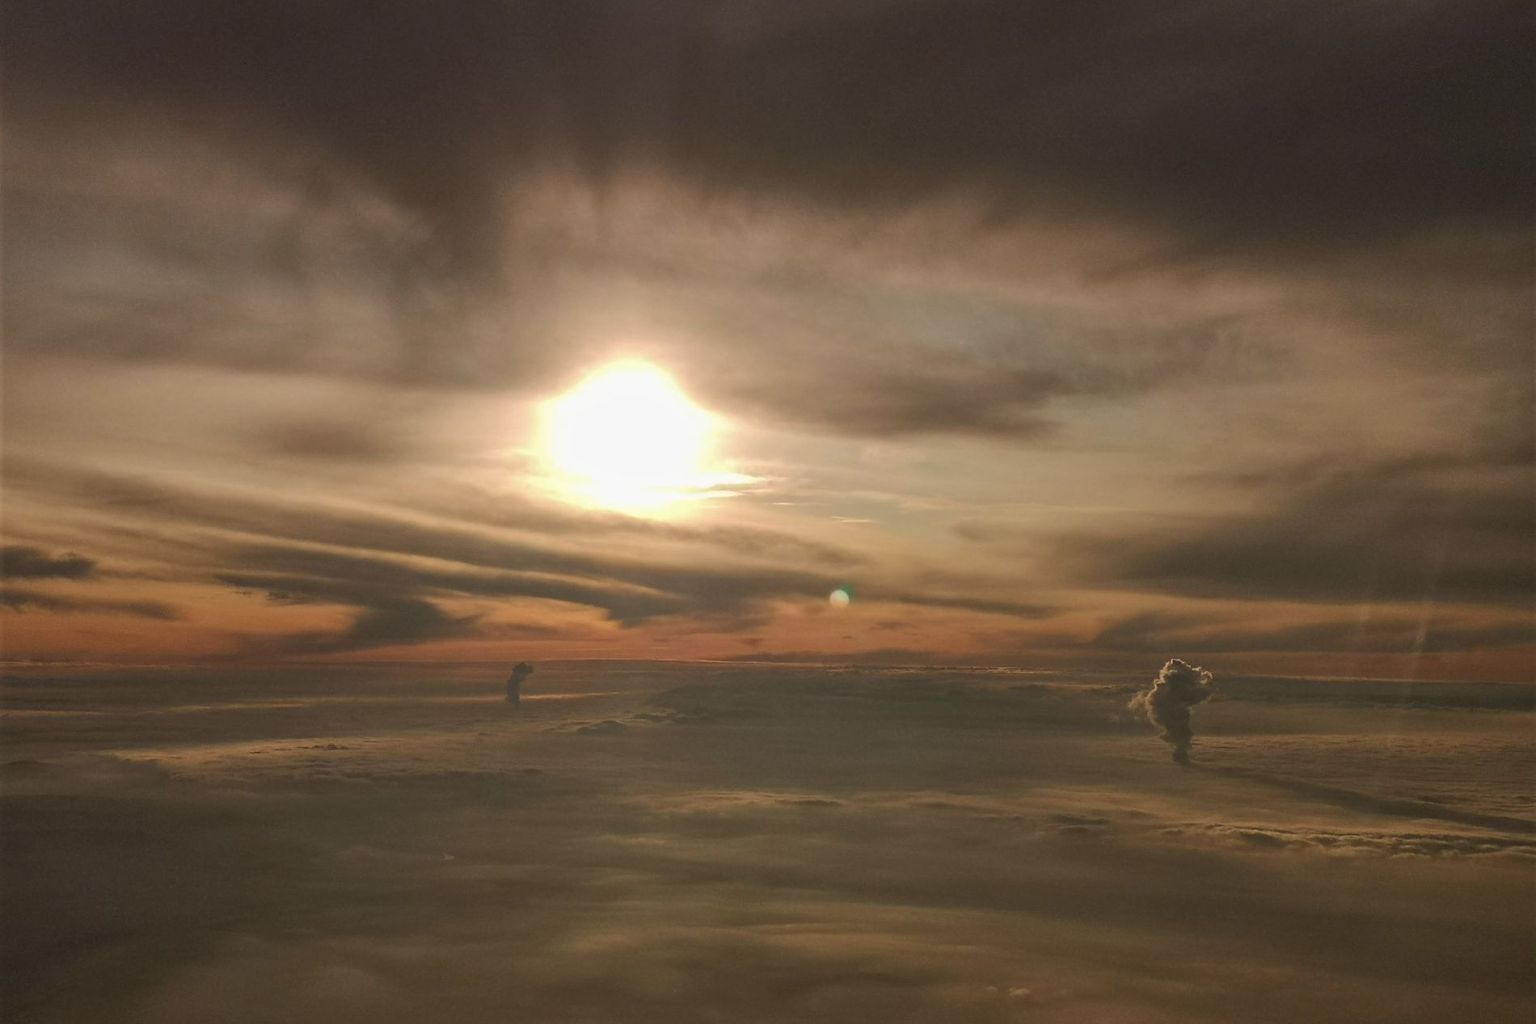 Plumes of the nuclear power plants bursting through the inversion layer